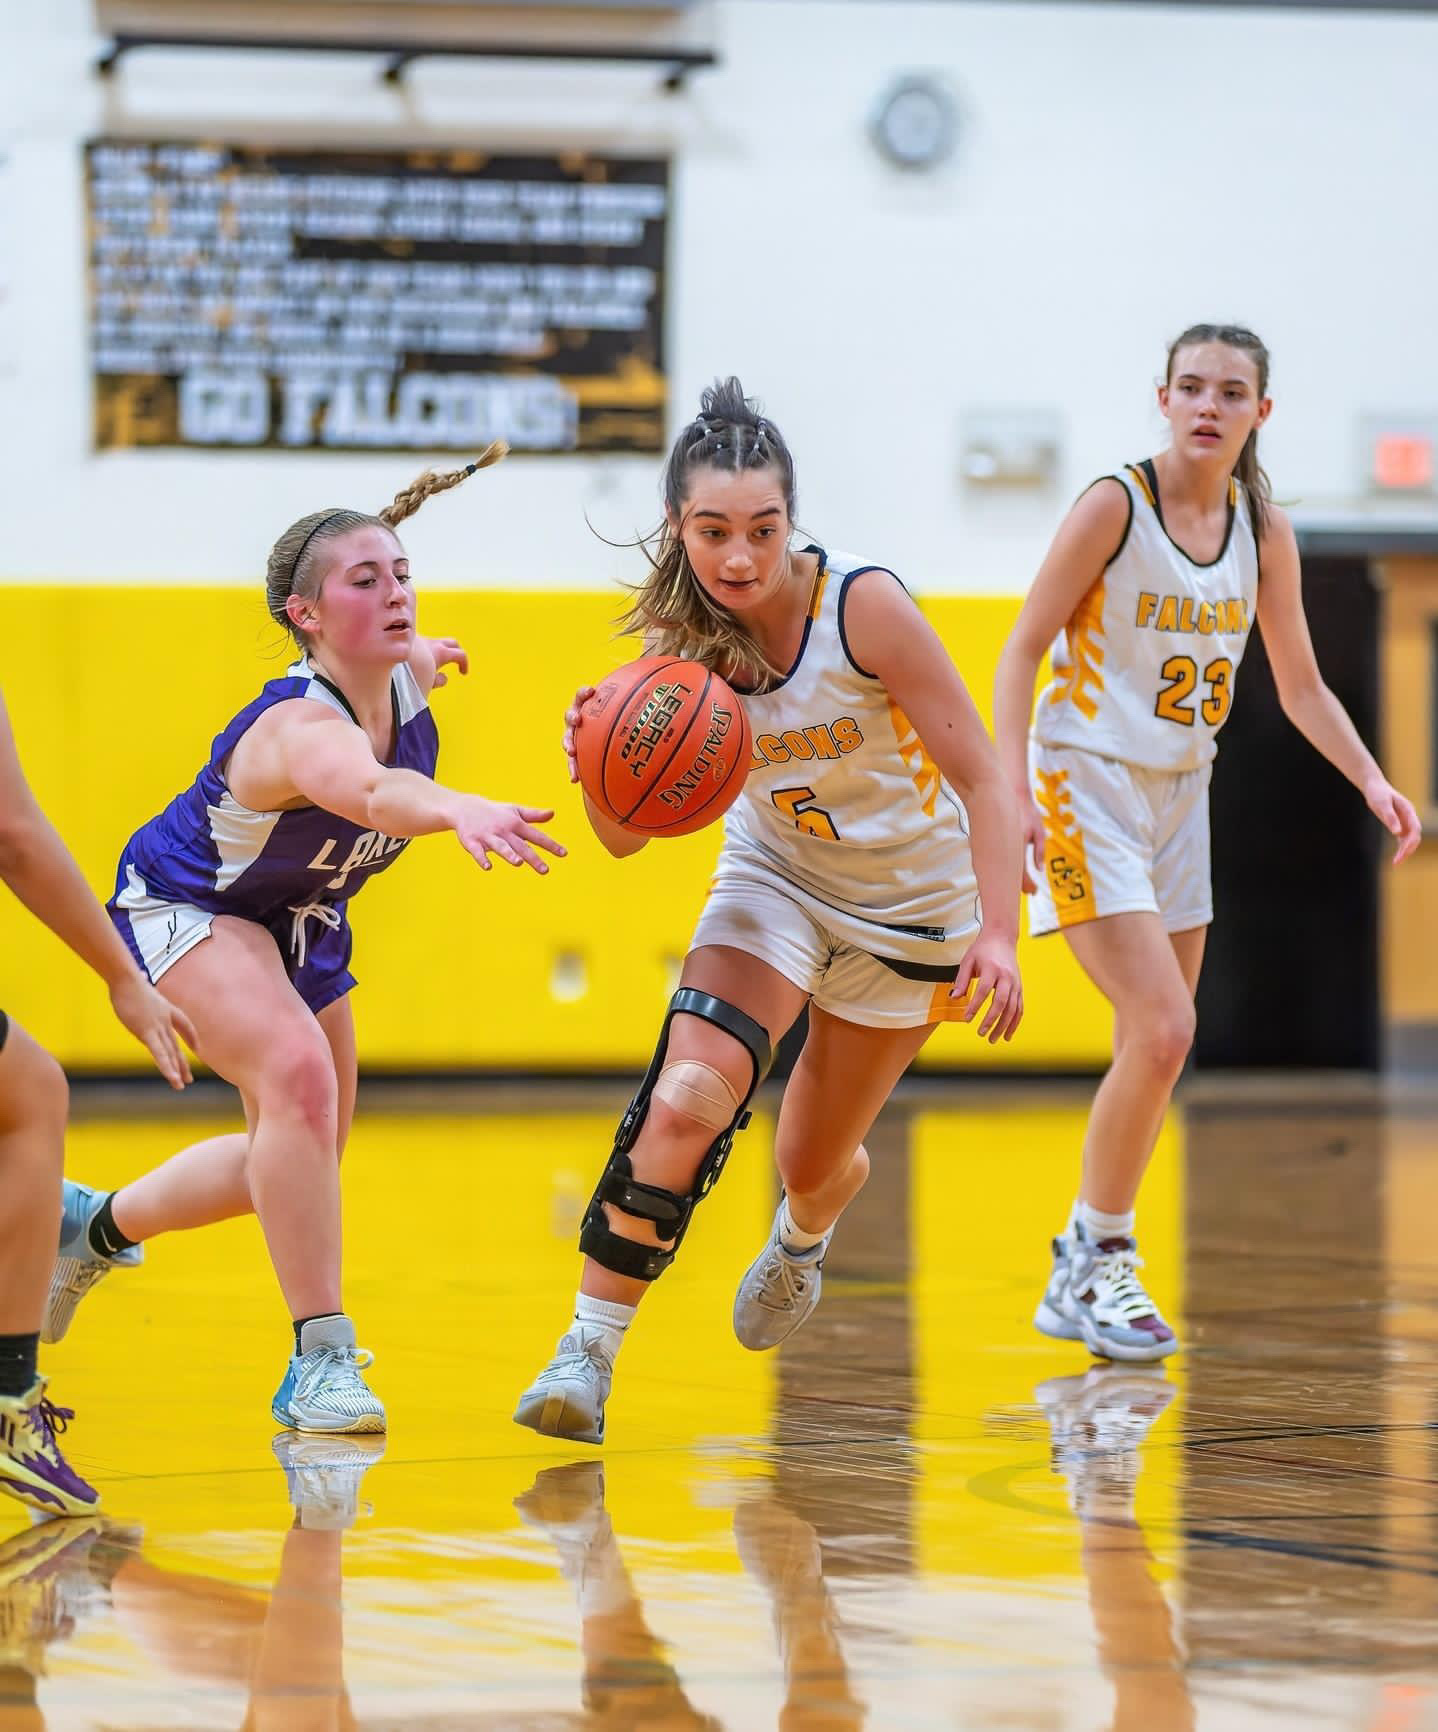 Monday Girls' Basketball Wrap: Smith's double-double leads HF-L ...